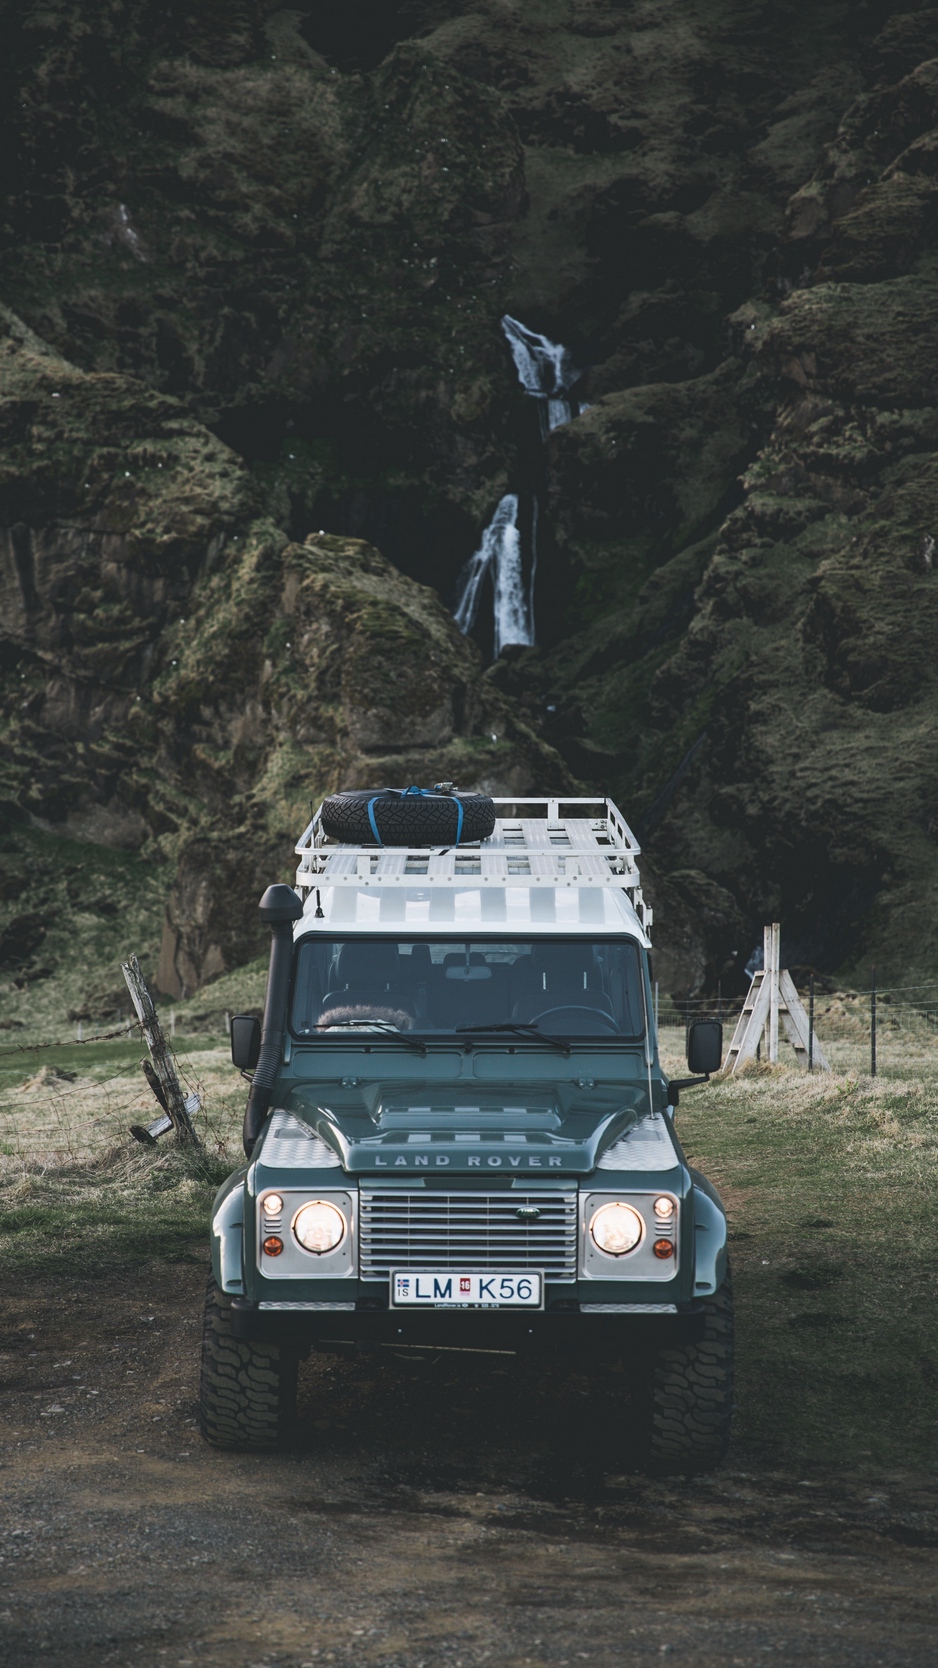 Wallpaper Land Rover Suv Mountains Car iPhone